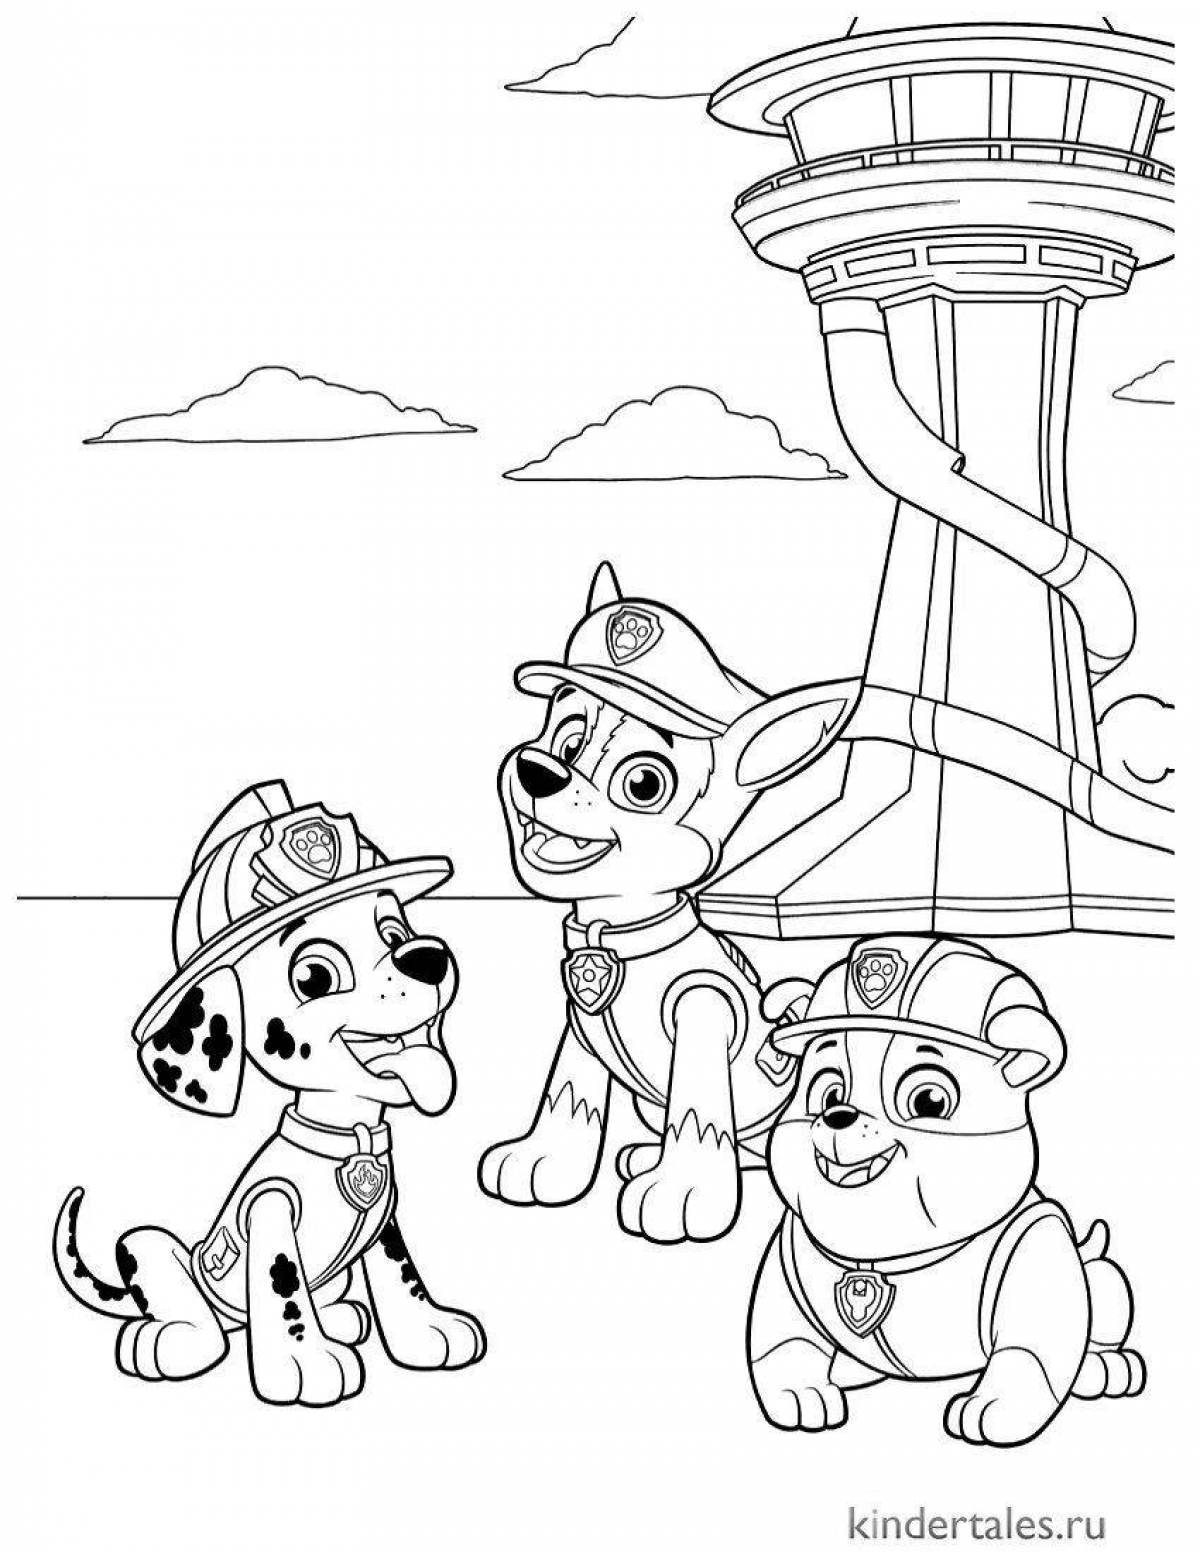 Playful marshal coloring page for kids